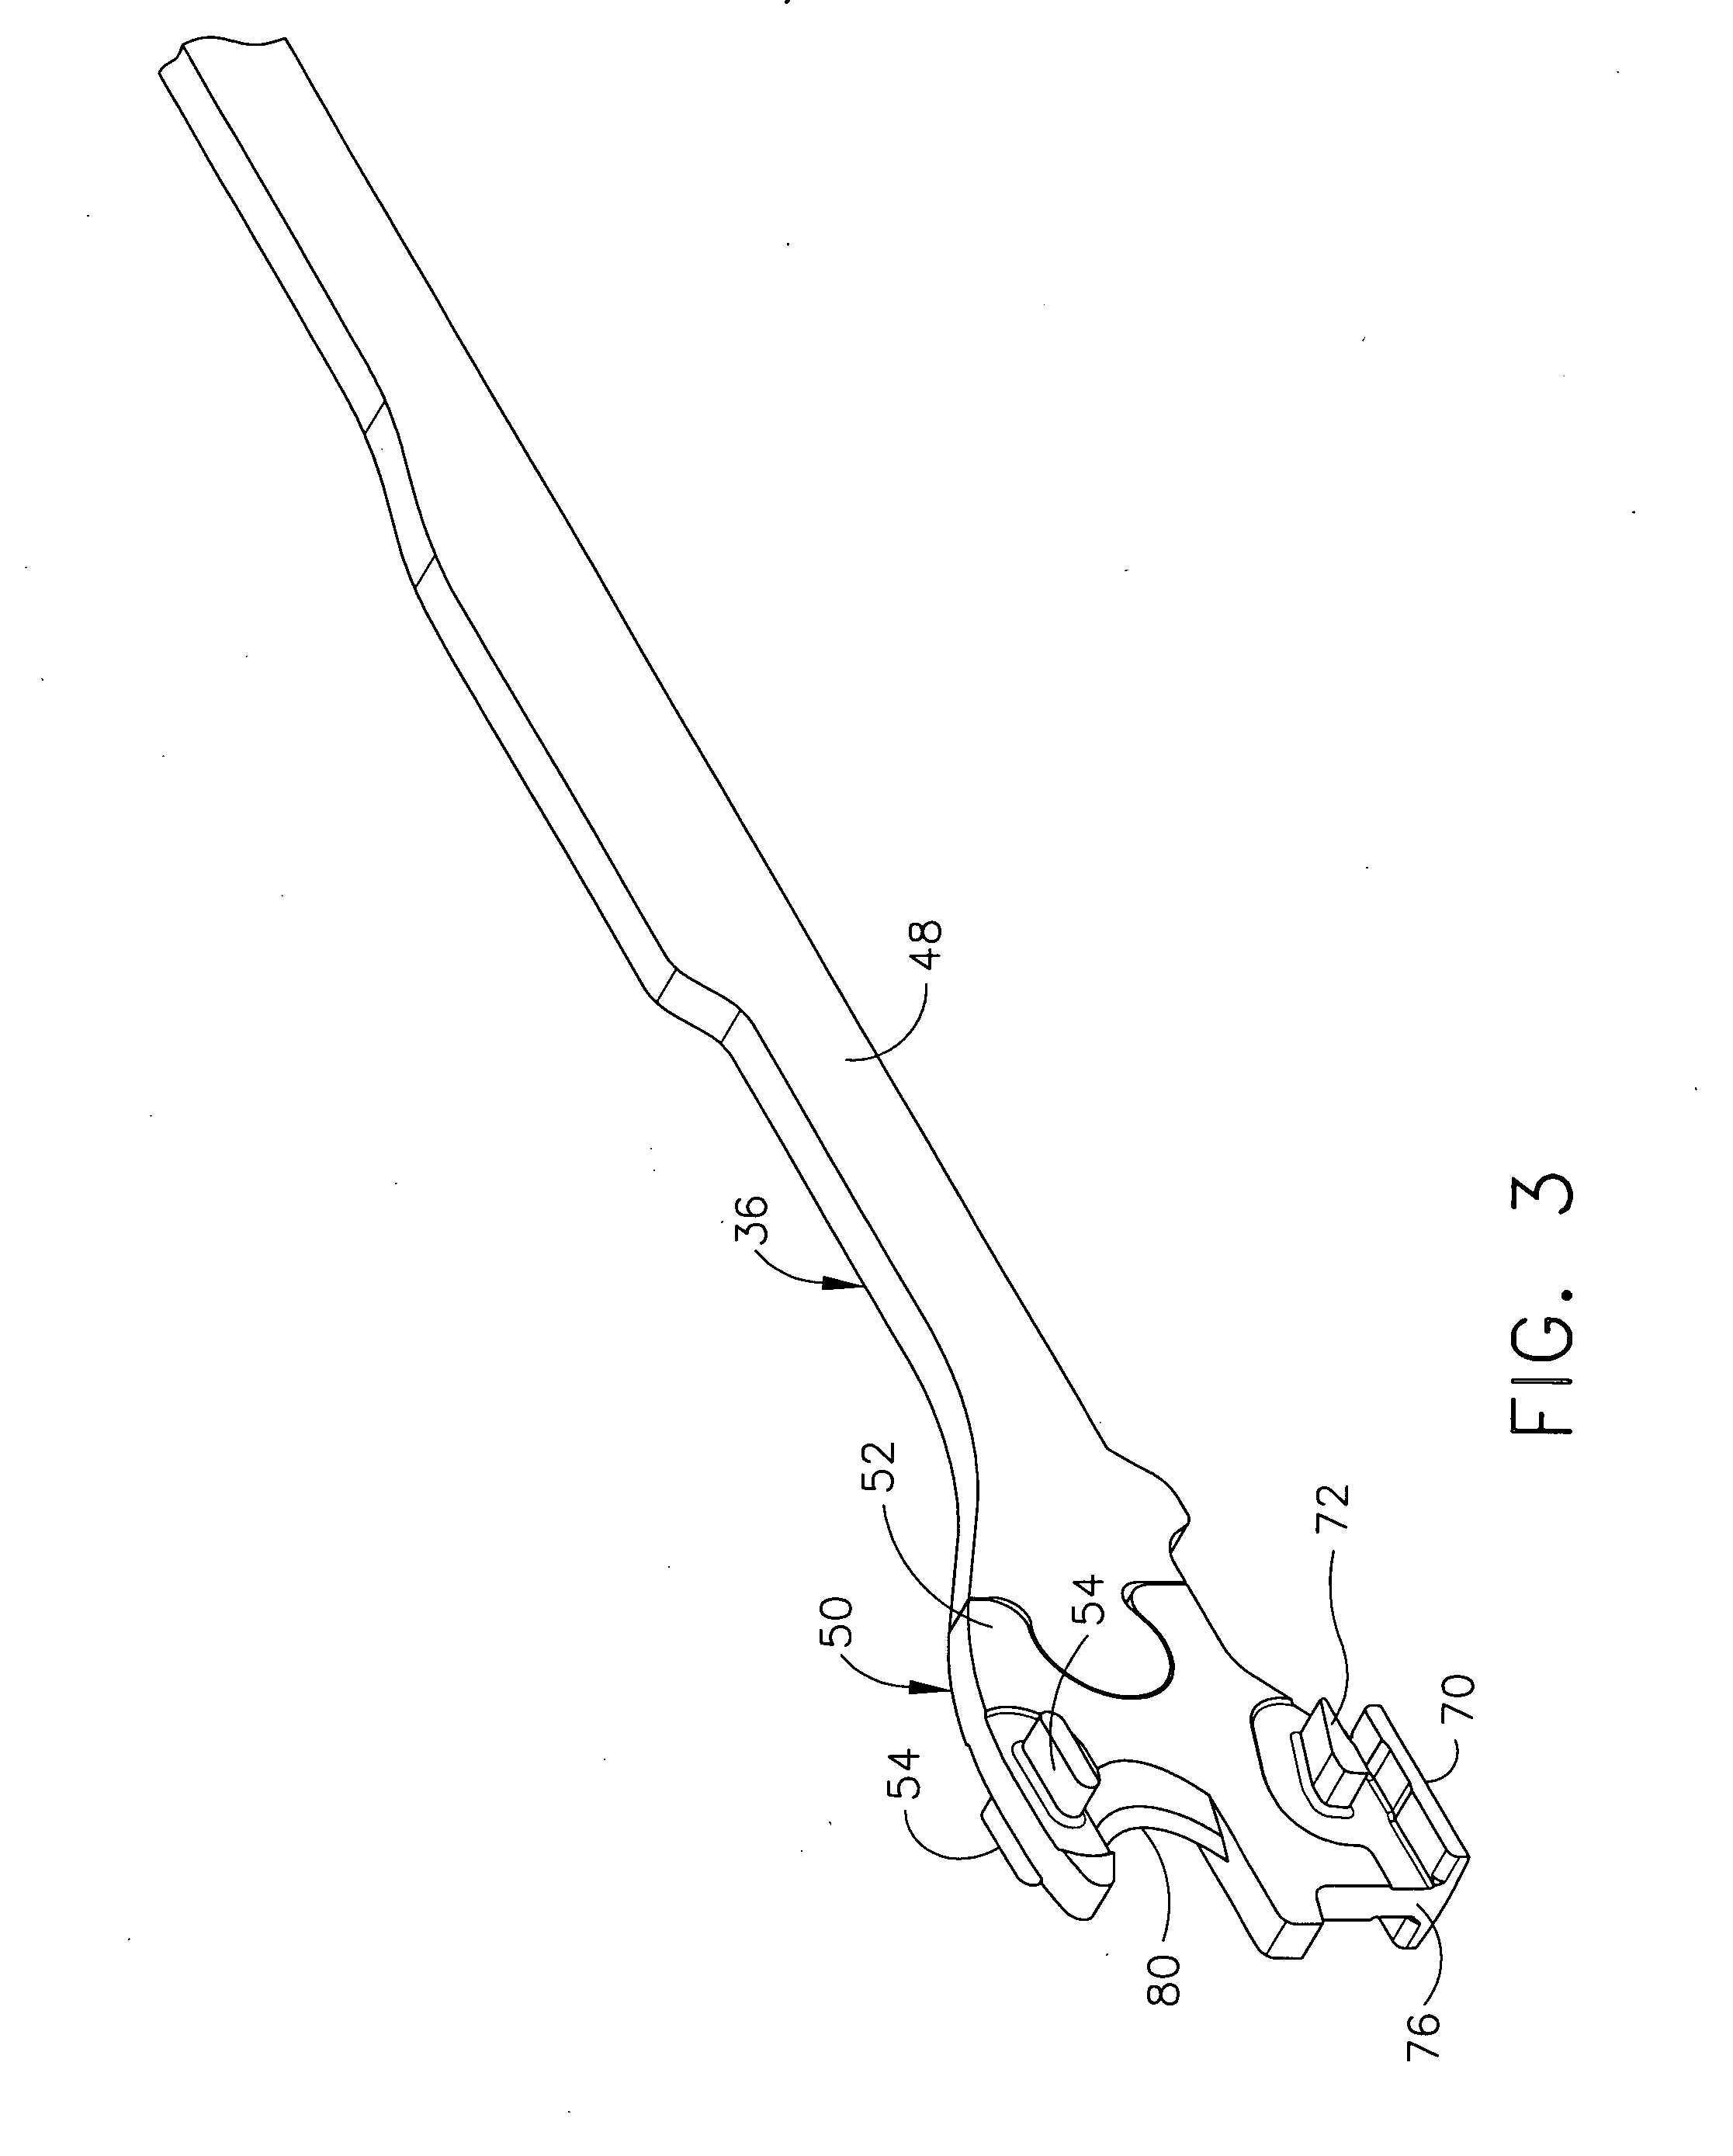 Surgical cutting and stapling device with closure apparatus for limiting maximum tissue compression force